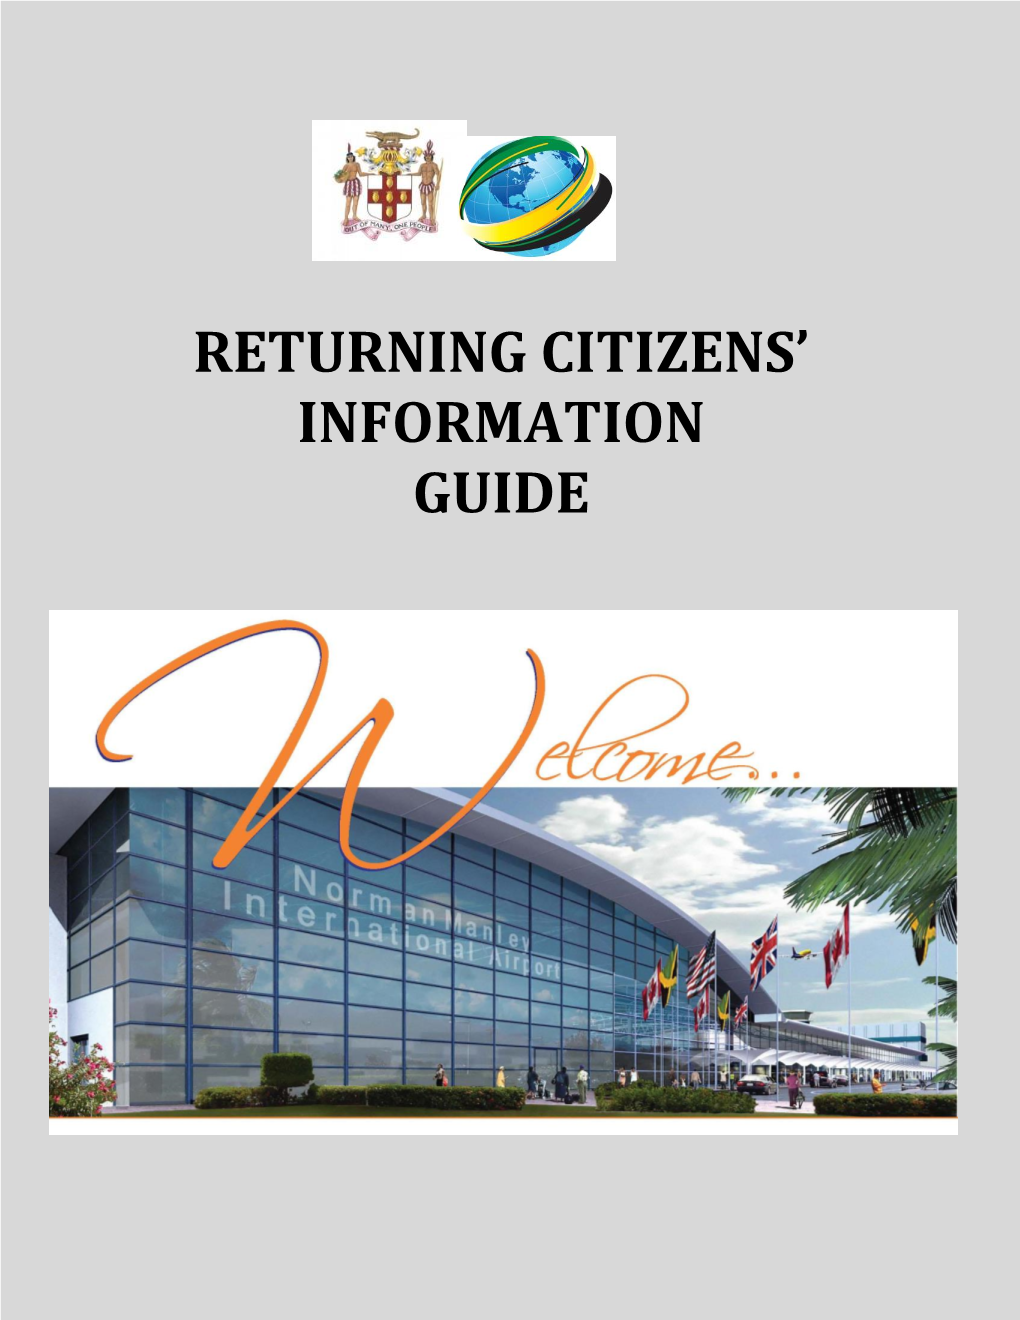 Returning Citizens' Information Guide